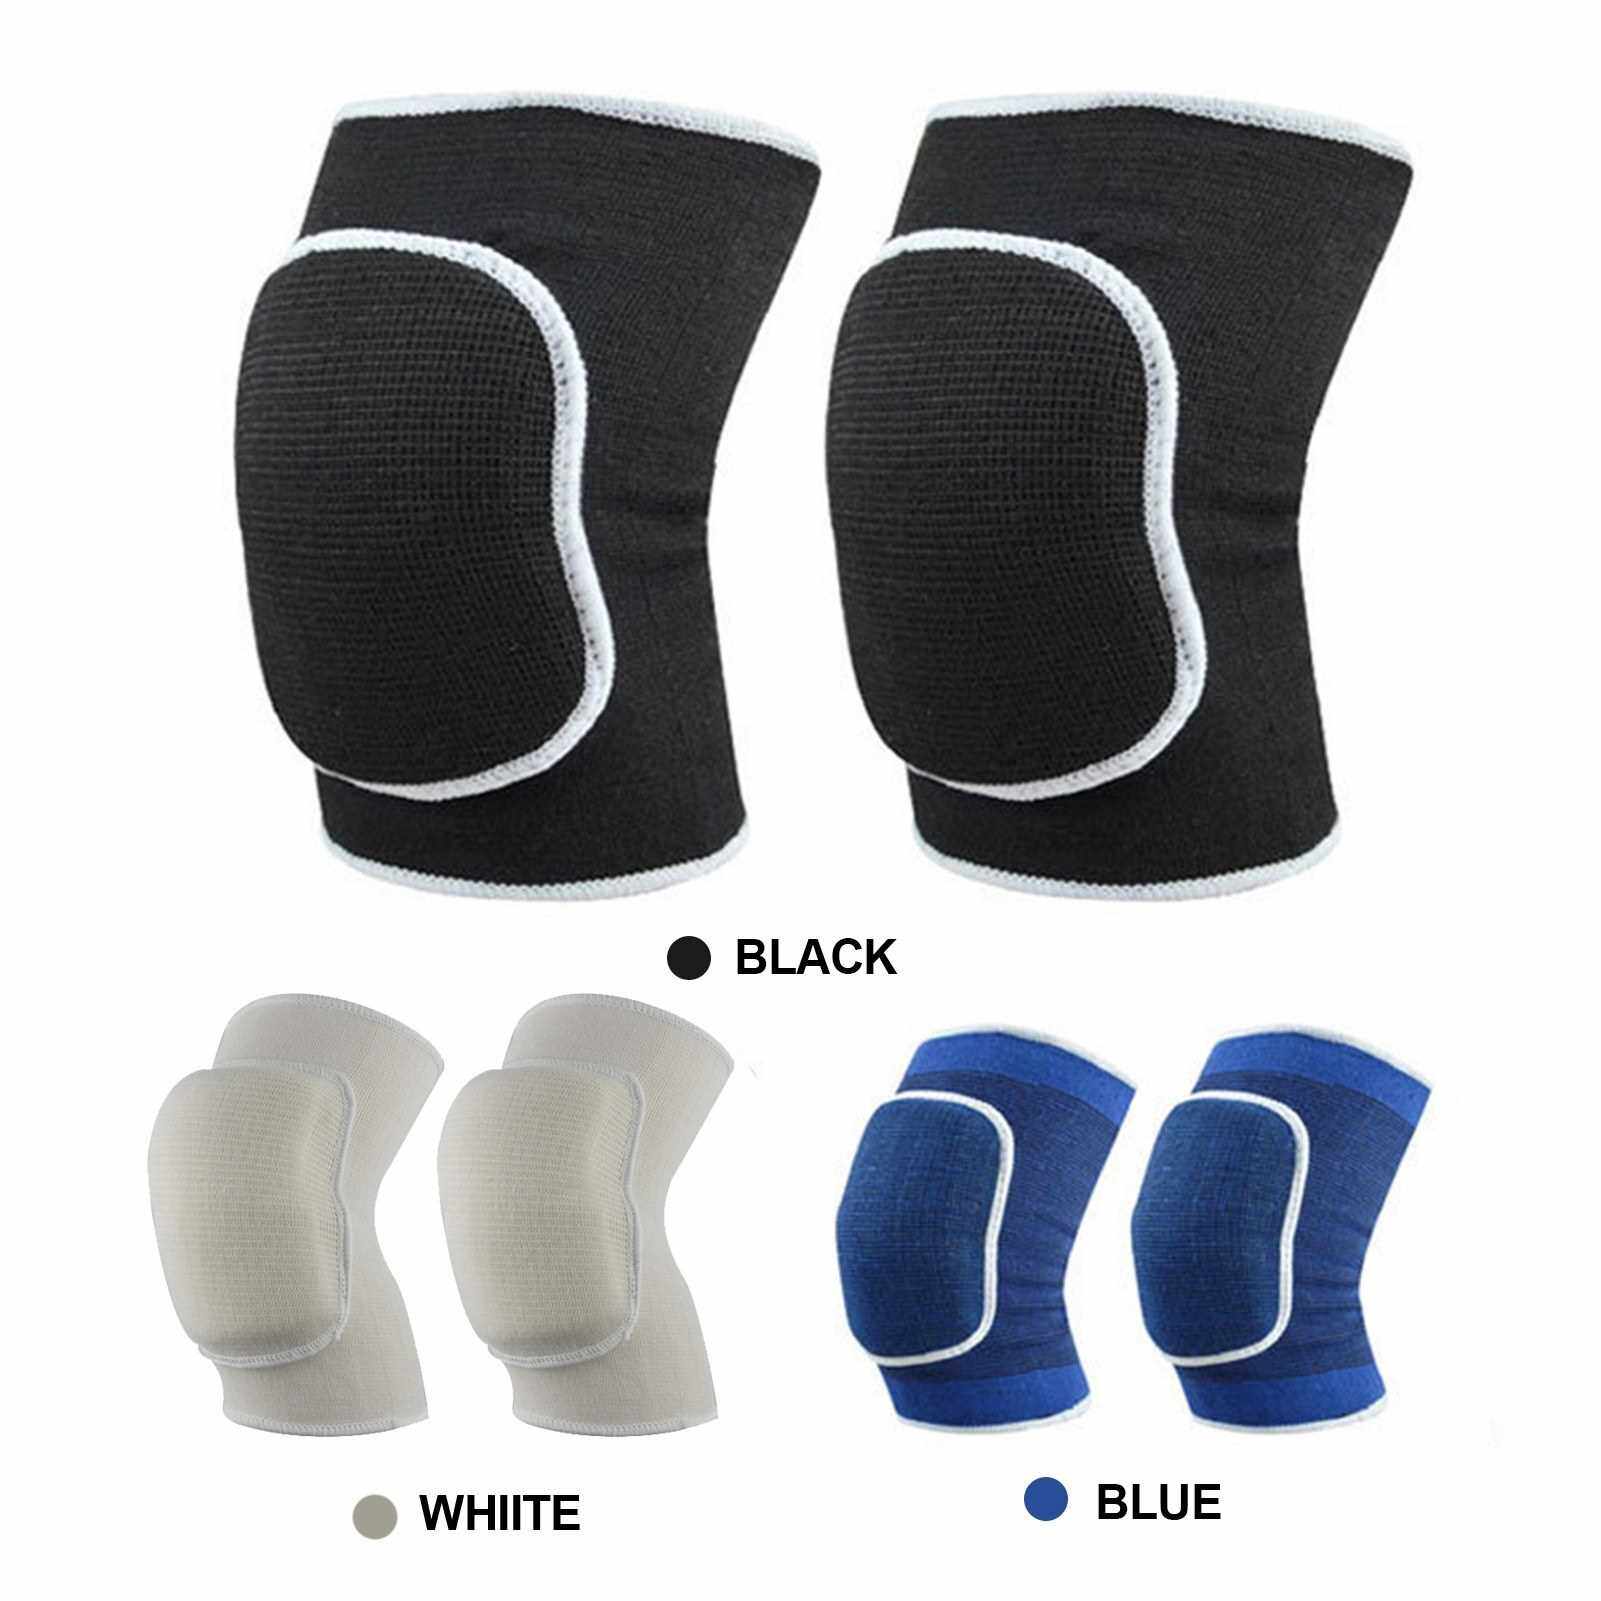 BEST SELLER Kneepads Knee Protector Fitness Soft Breathable Knee Guards Elastic Knee Braces Knee Support for Volleyball Football Dance Yoga Tennis Running Cycling Mountaineering (Blue)